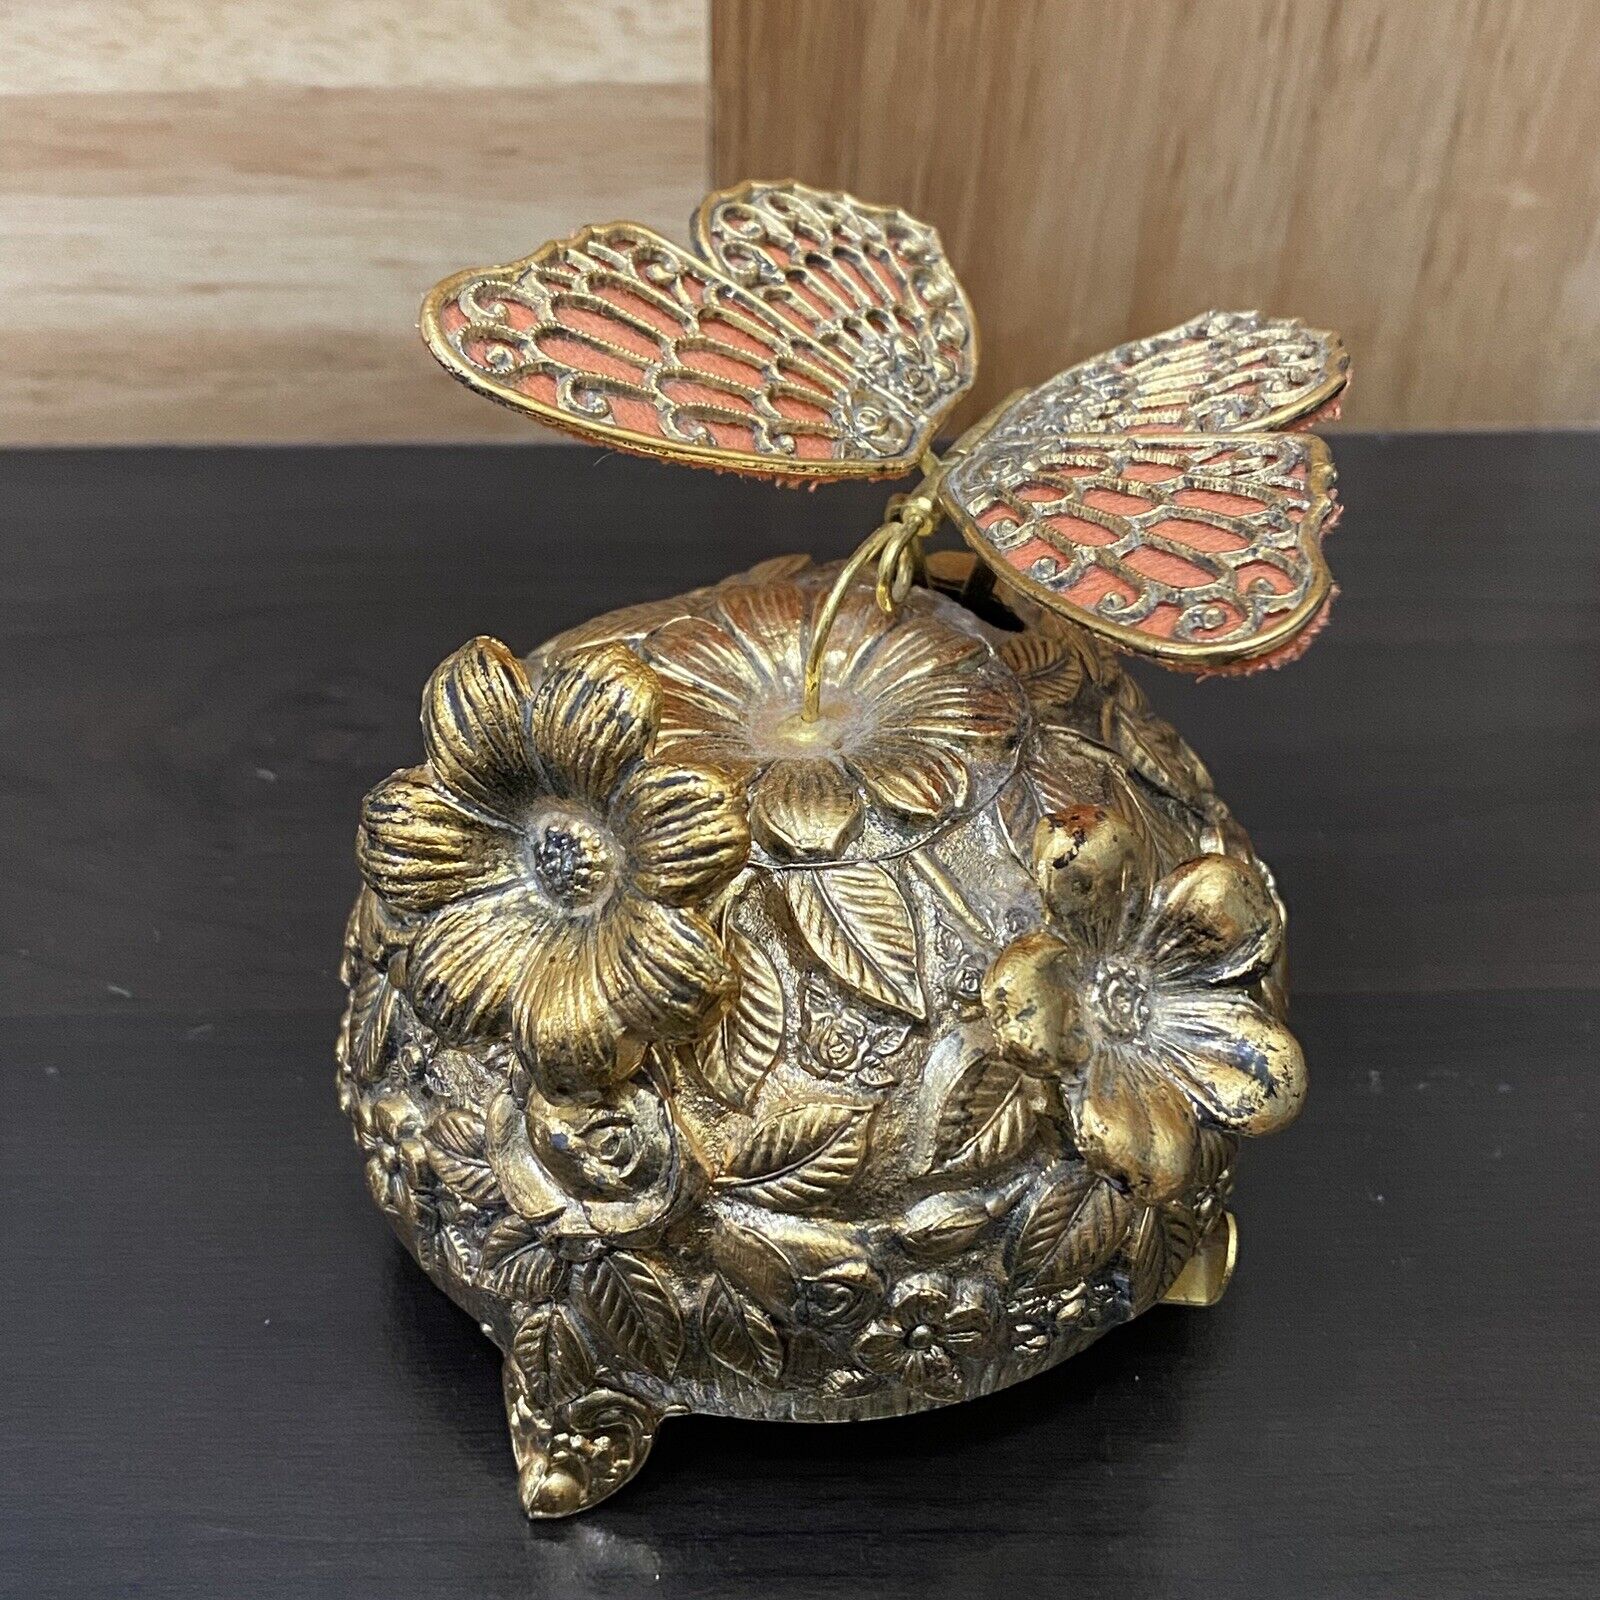 Vintage 60’s WESTLAND Japan Butterfly Automaton Brass Musical Box “Greensleeves”